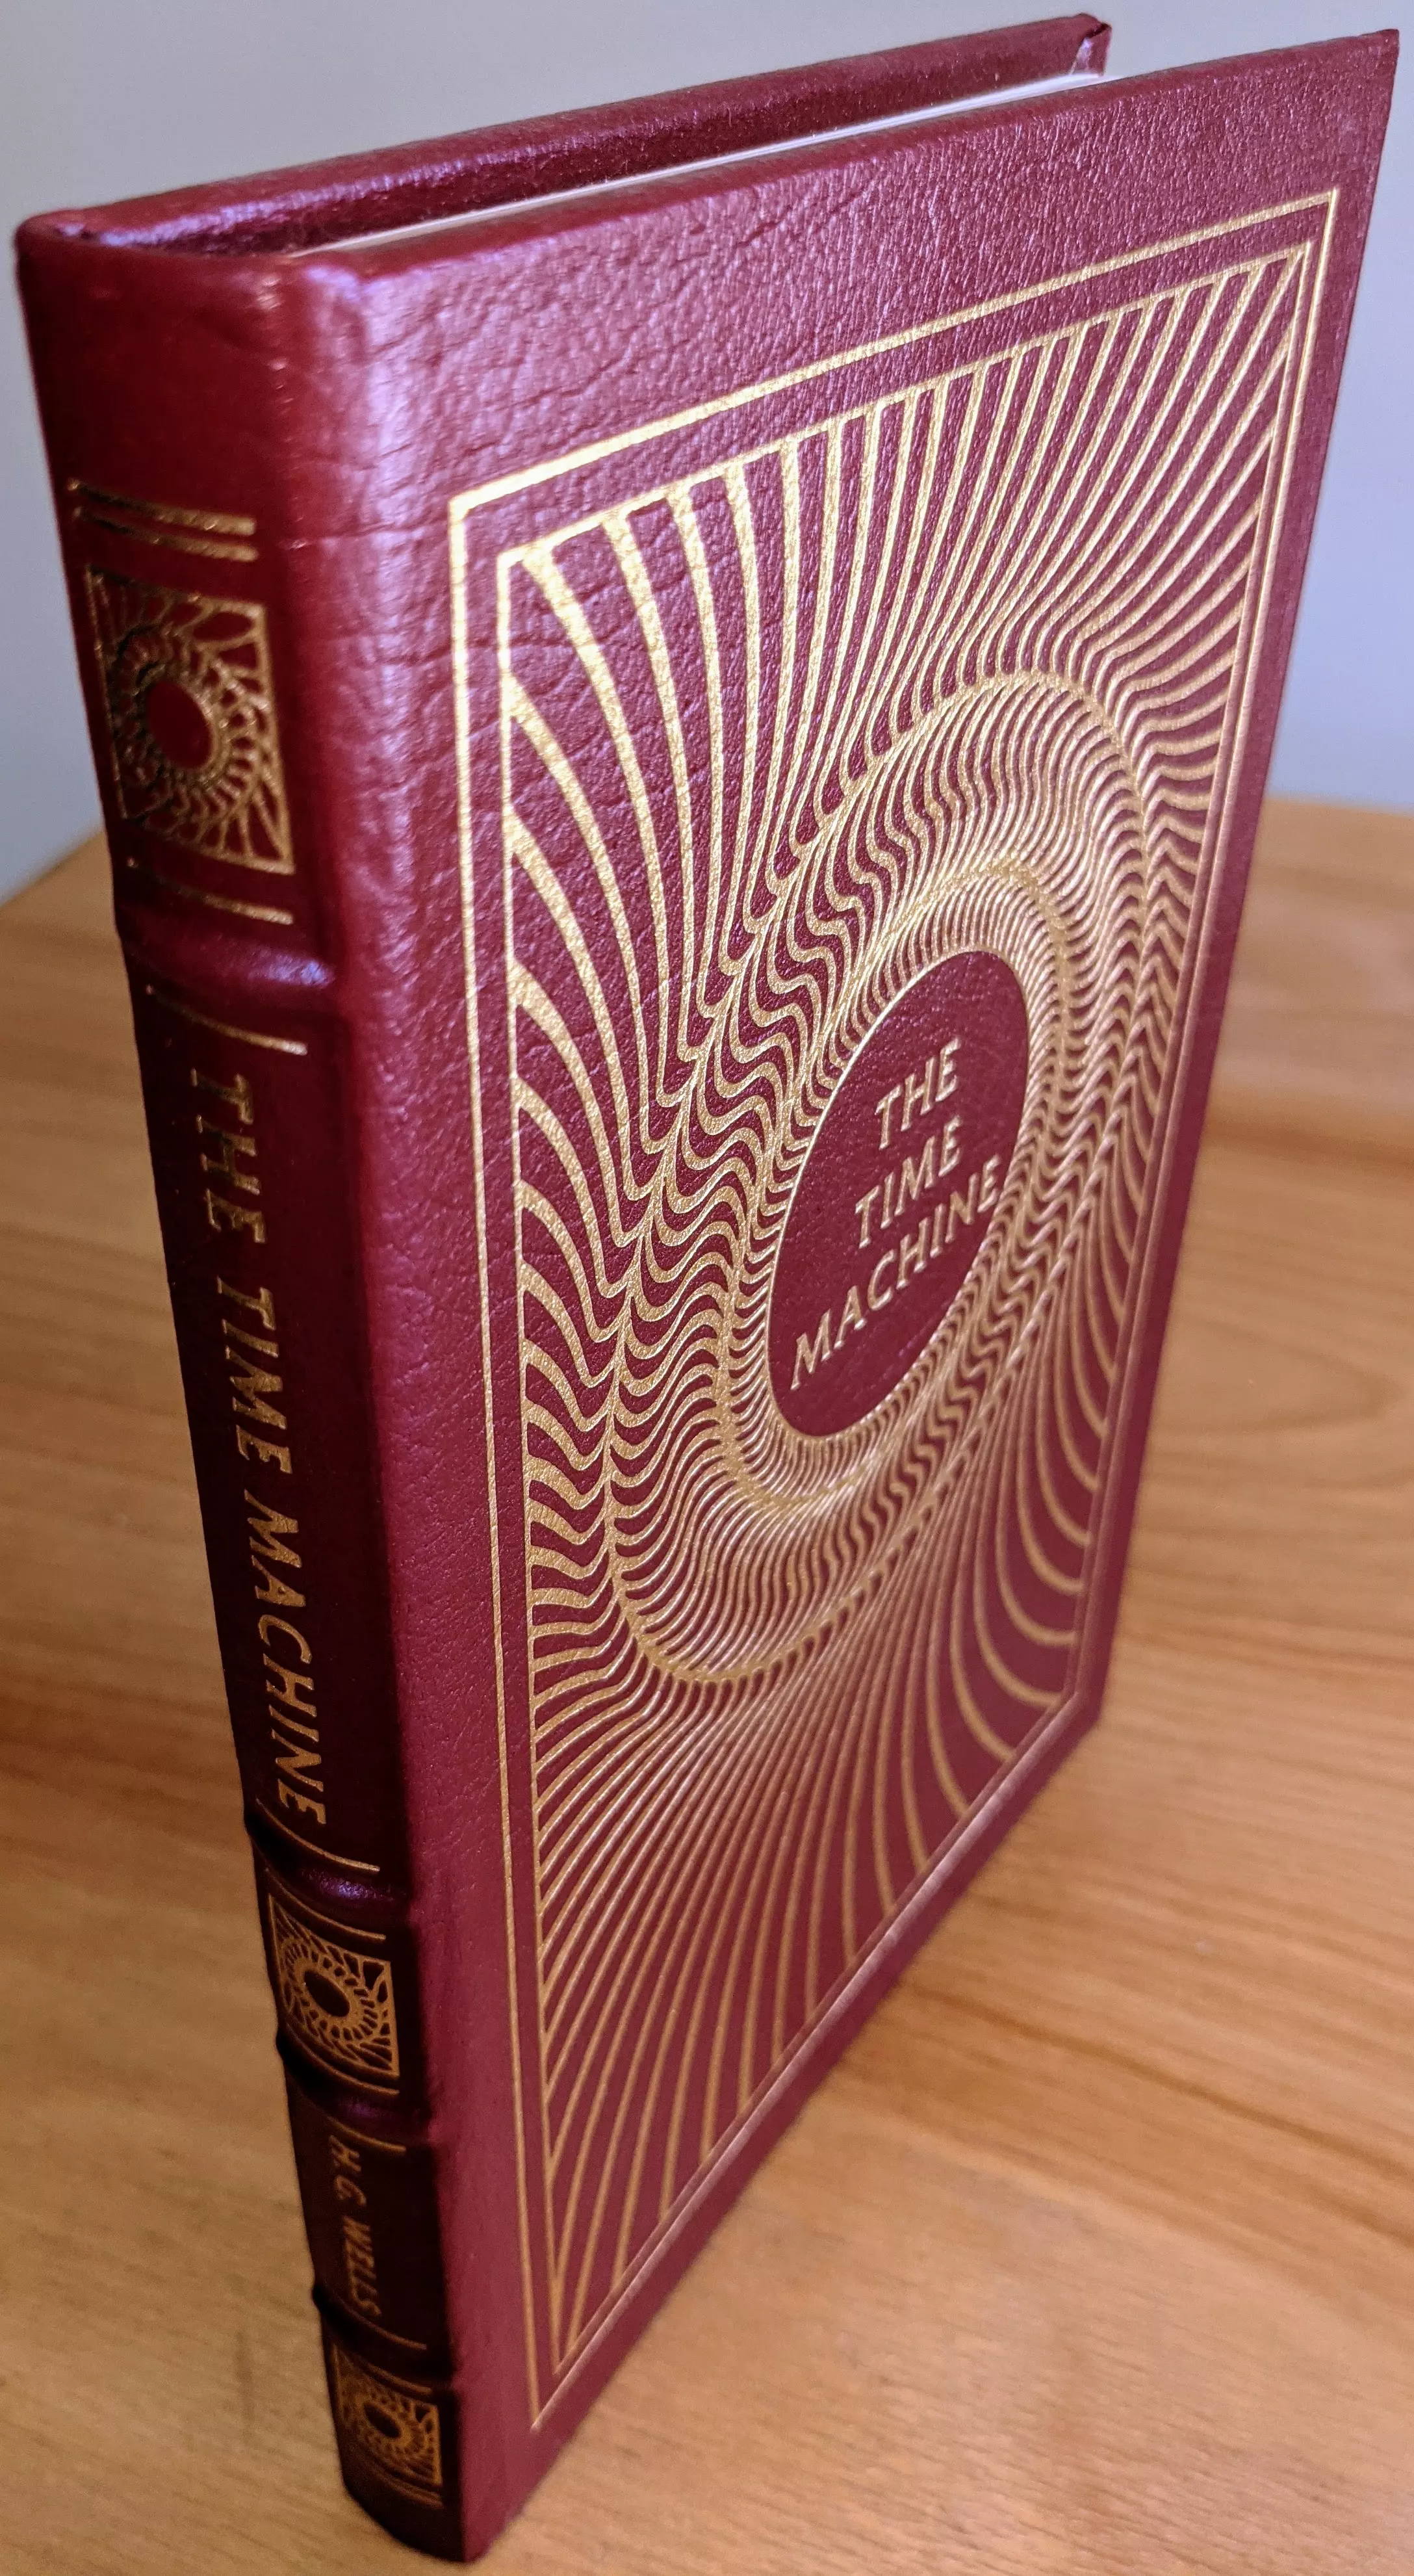 Stunning Red Leather Bound hardback book with hubbed spine, cover artwork in 22kt gold, printed on archival paper with gold gilded edges, smyth sewing & concealed muslin joints
	  - original artwork by Joe Mugnaini